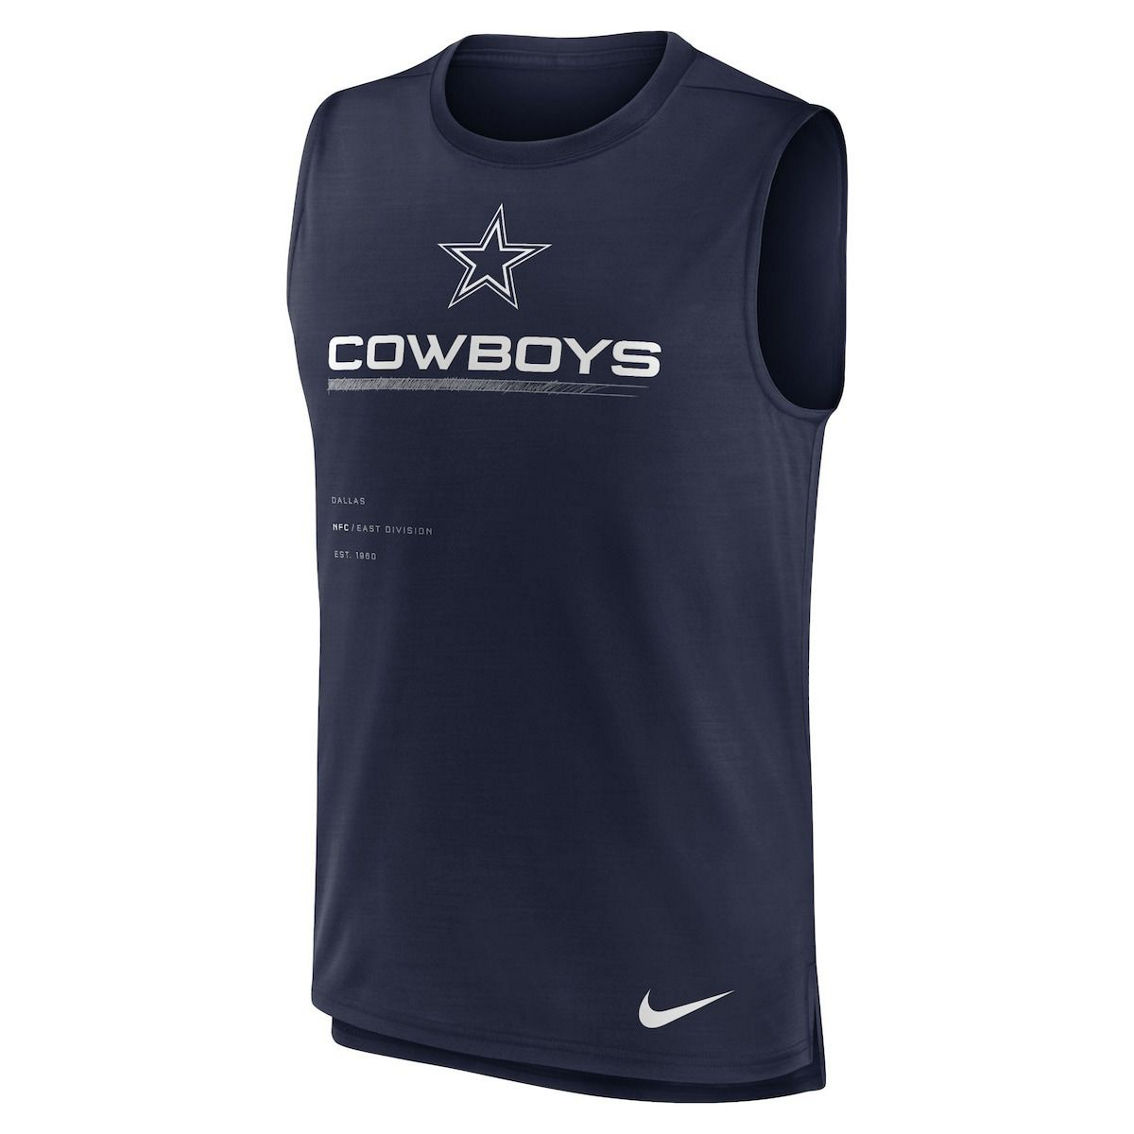 Nike Men's Navy Dallas Cowboys Muscle Trainer Tank Top - Image 3 of 4